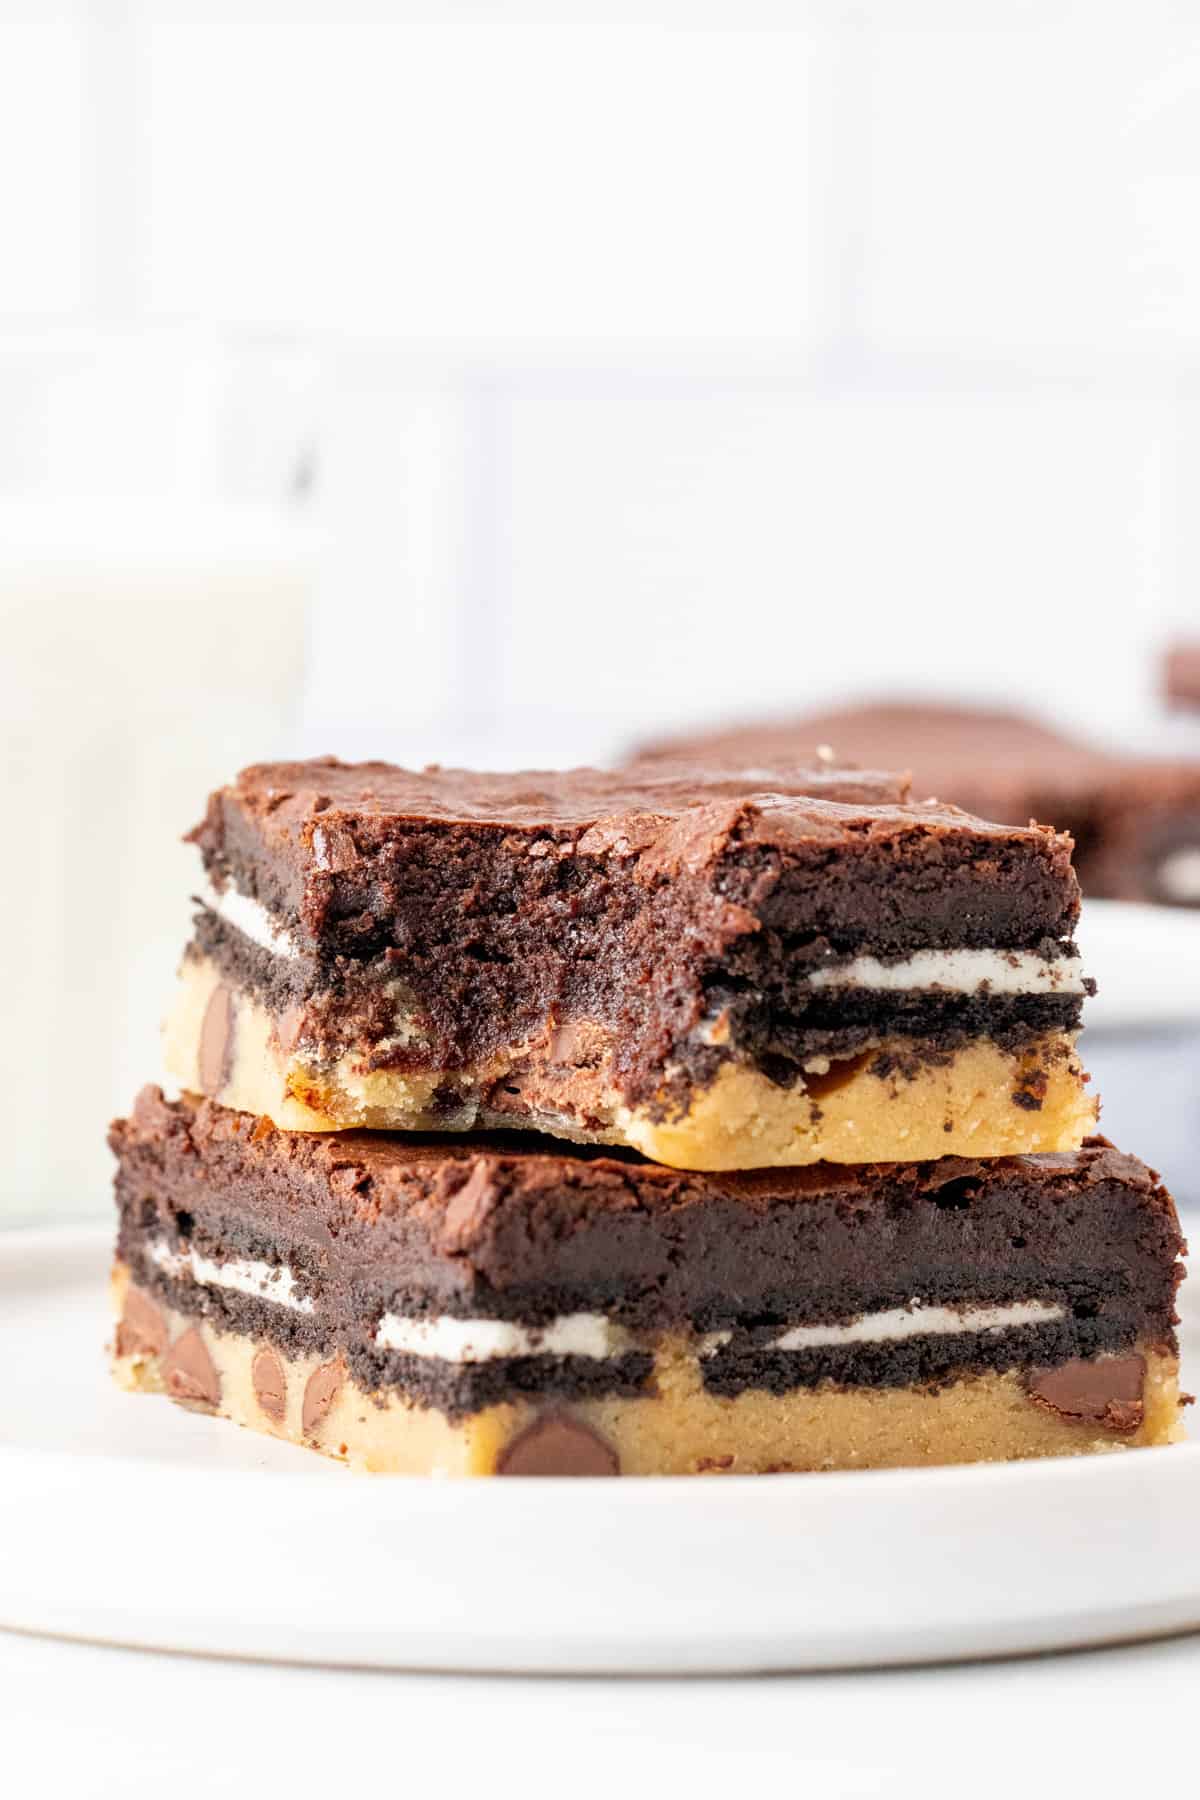 Two Oreo cookie dough brownies, one on top of each other, with a bite taken out.